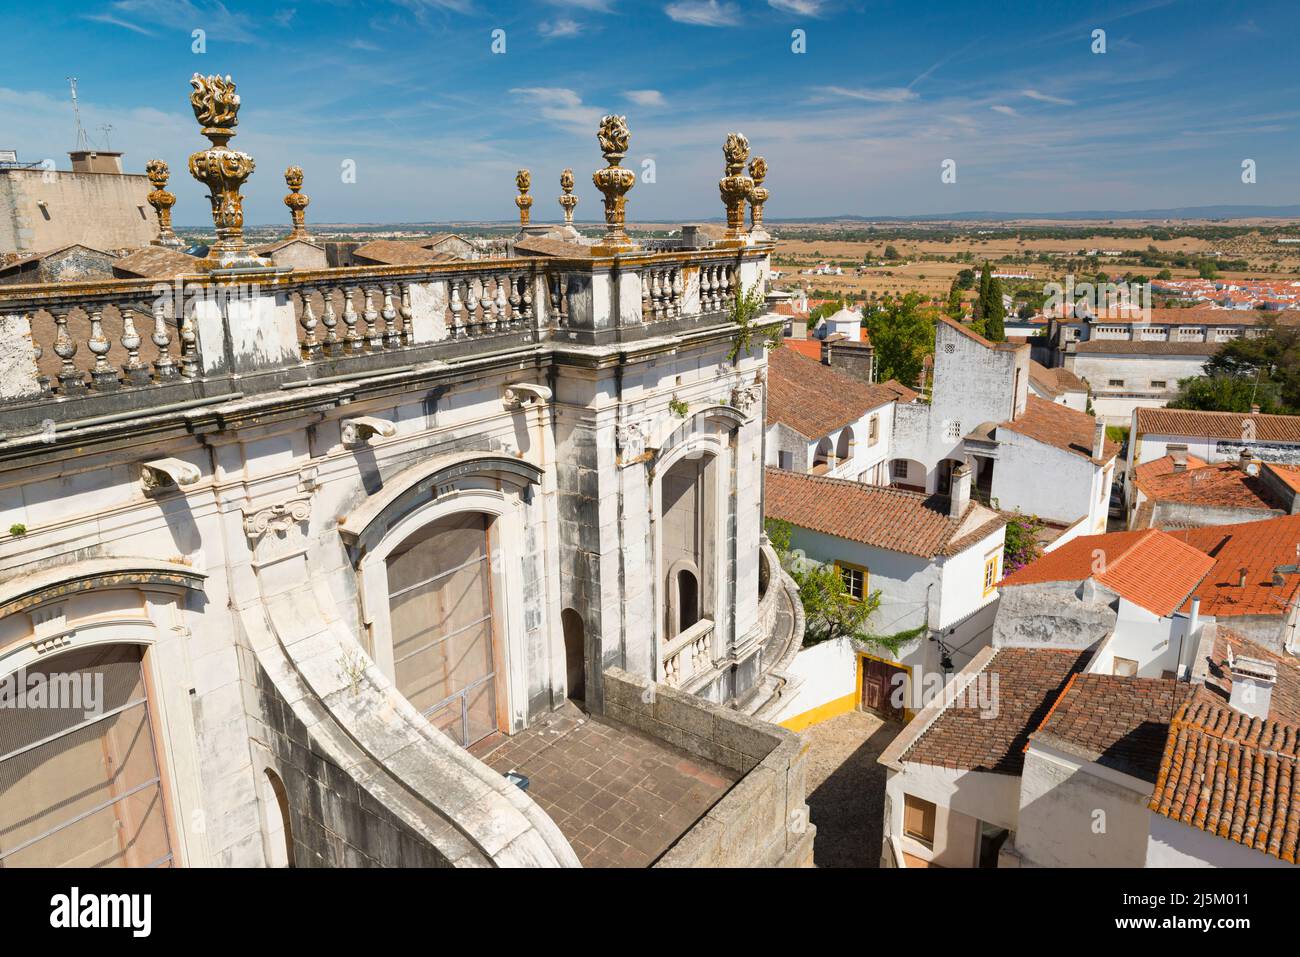 The roof / balcony of the Evora cathedral with a view on the city and surroundings of Evora. Portugal. Stock Photo